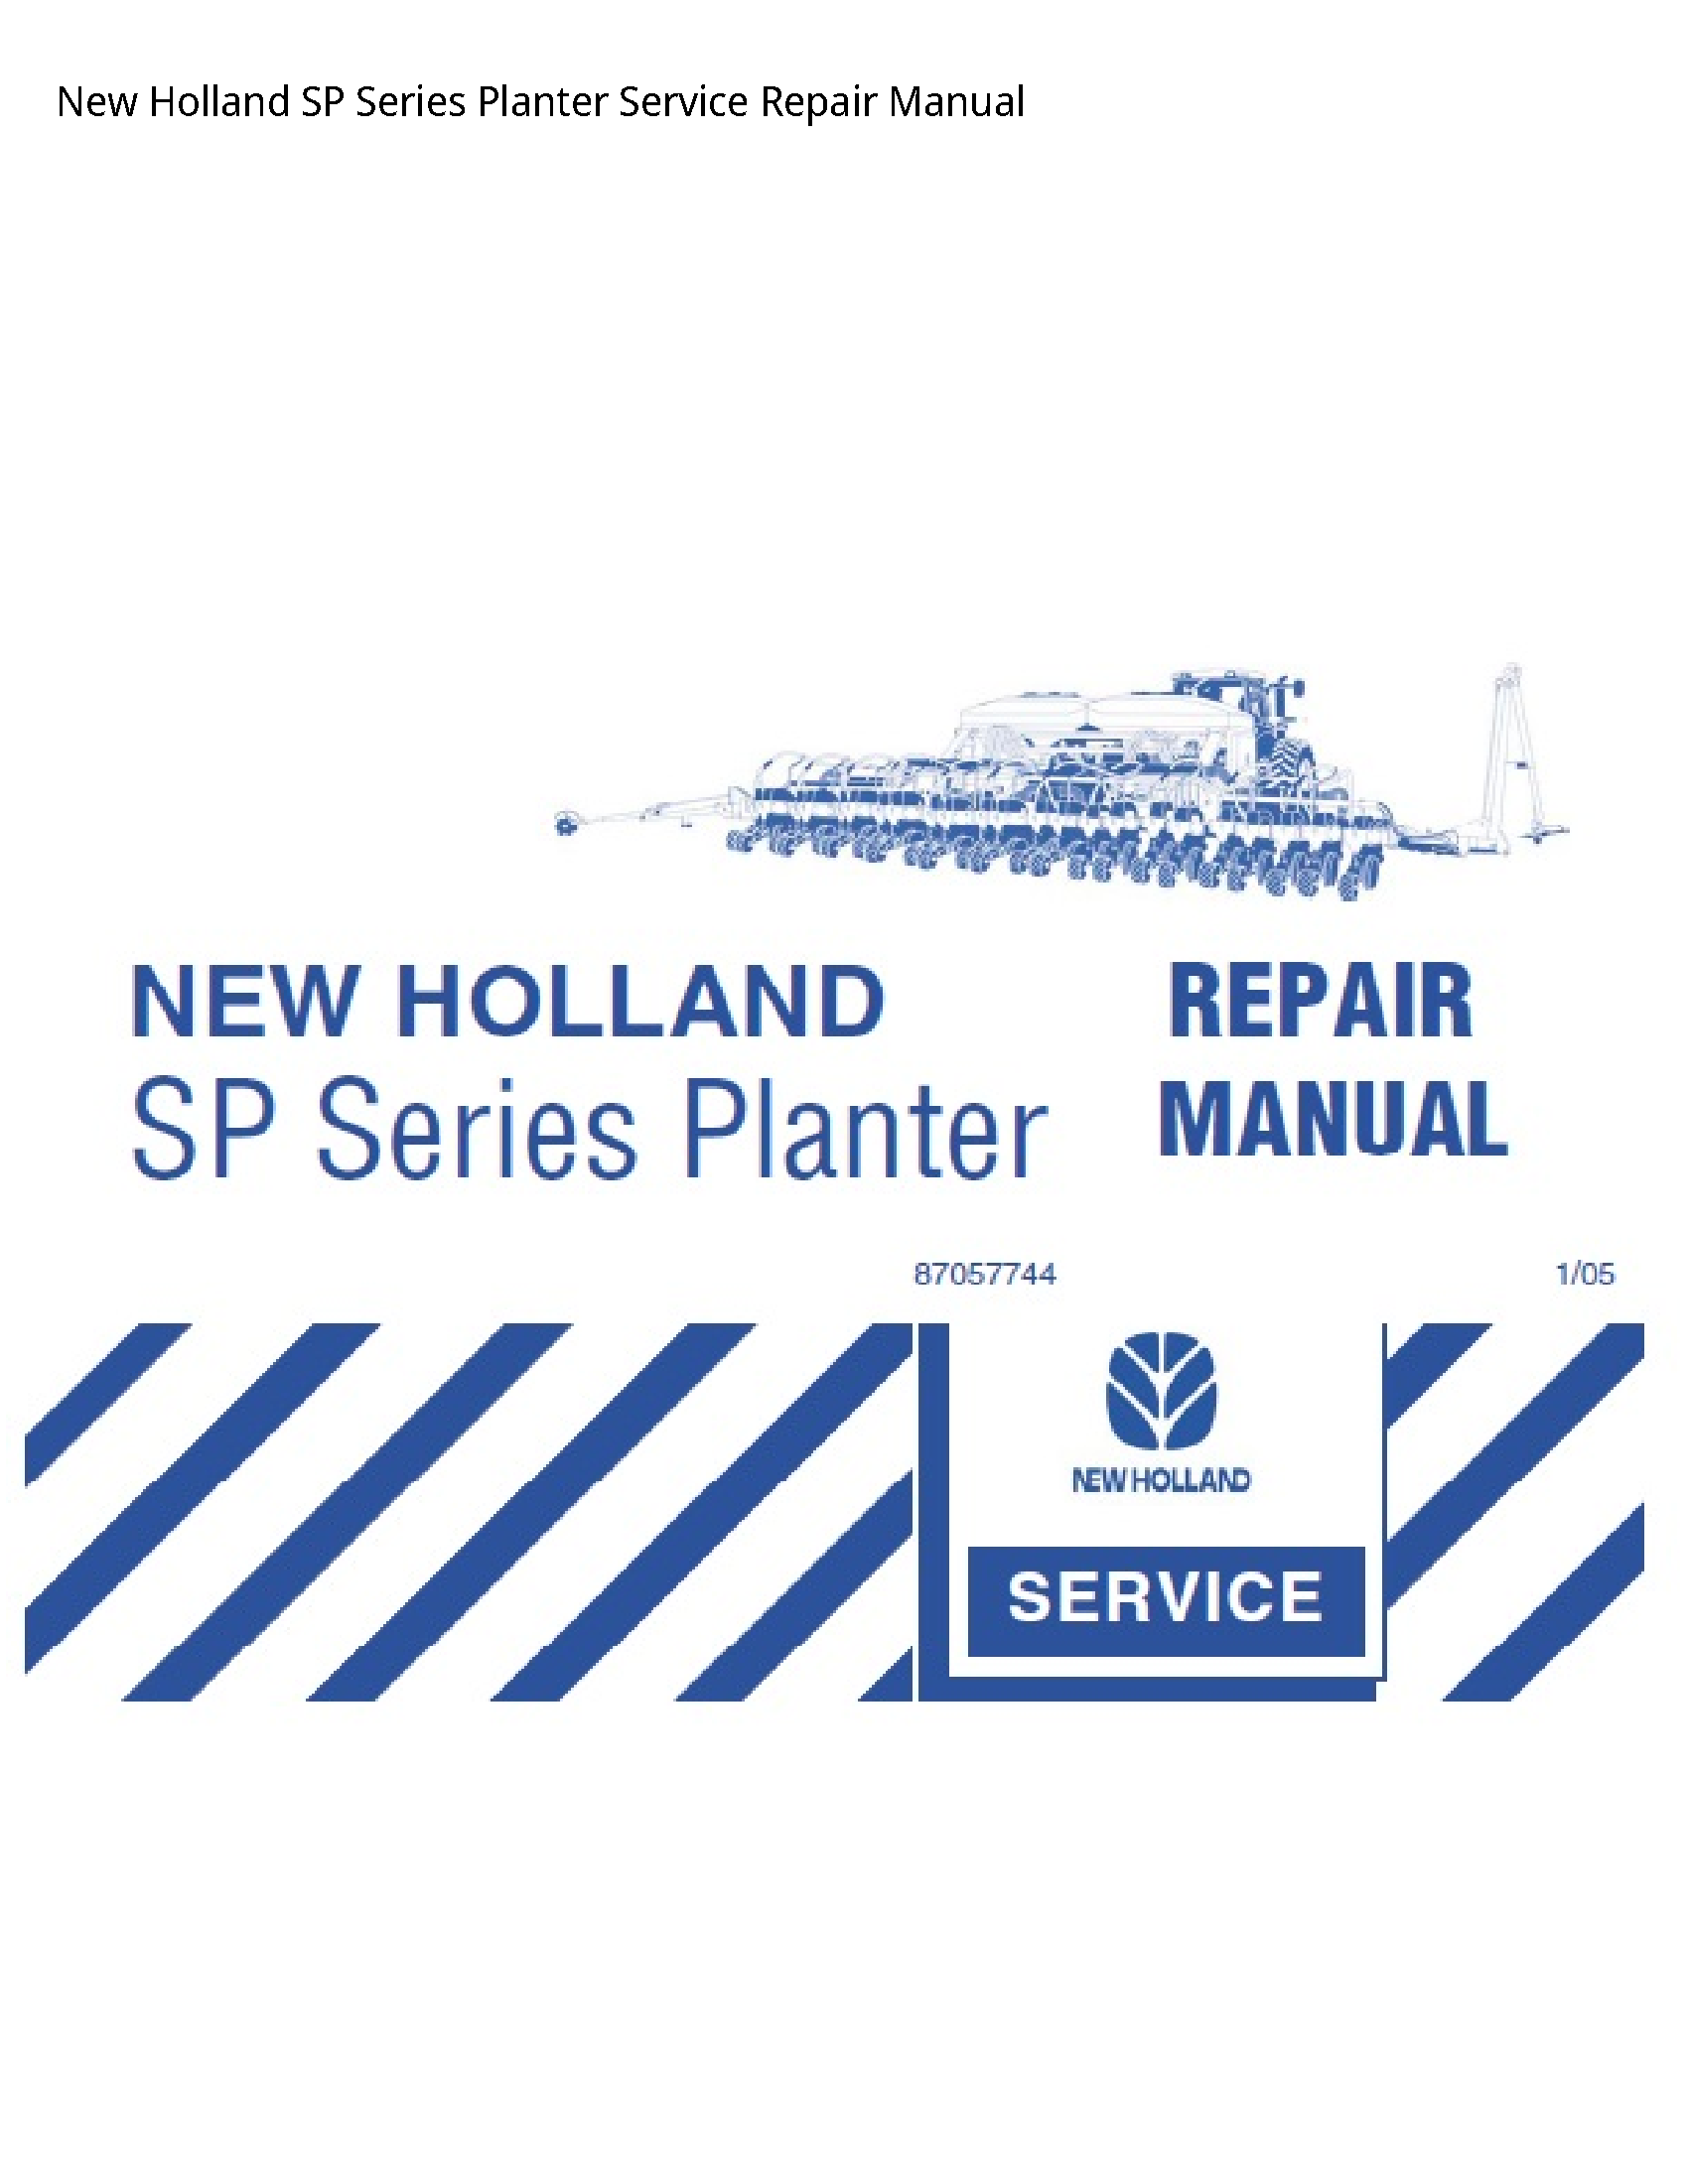 New Holland SP Series Planter manual